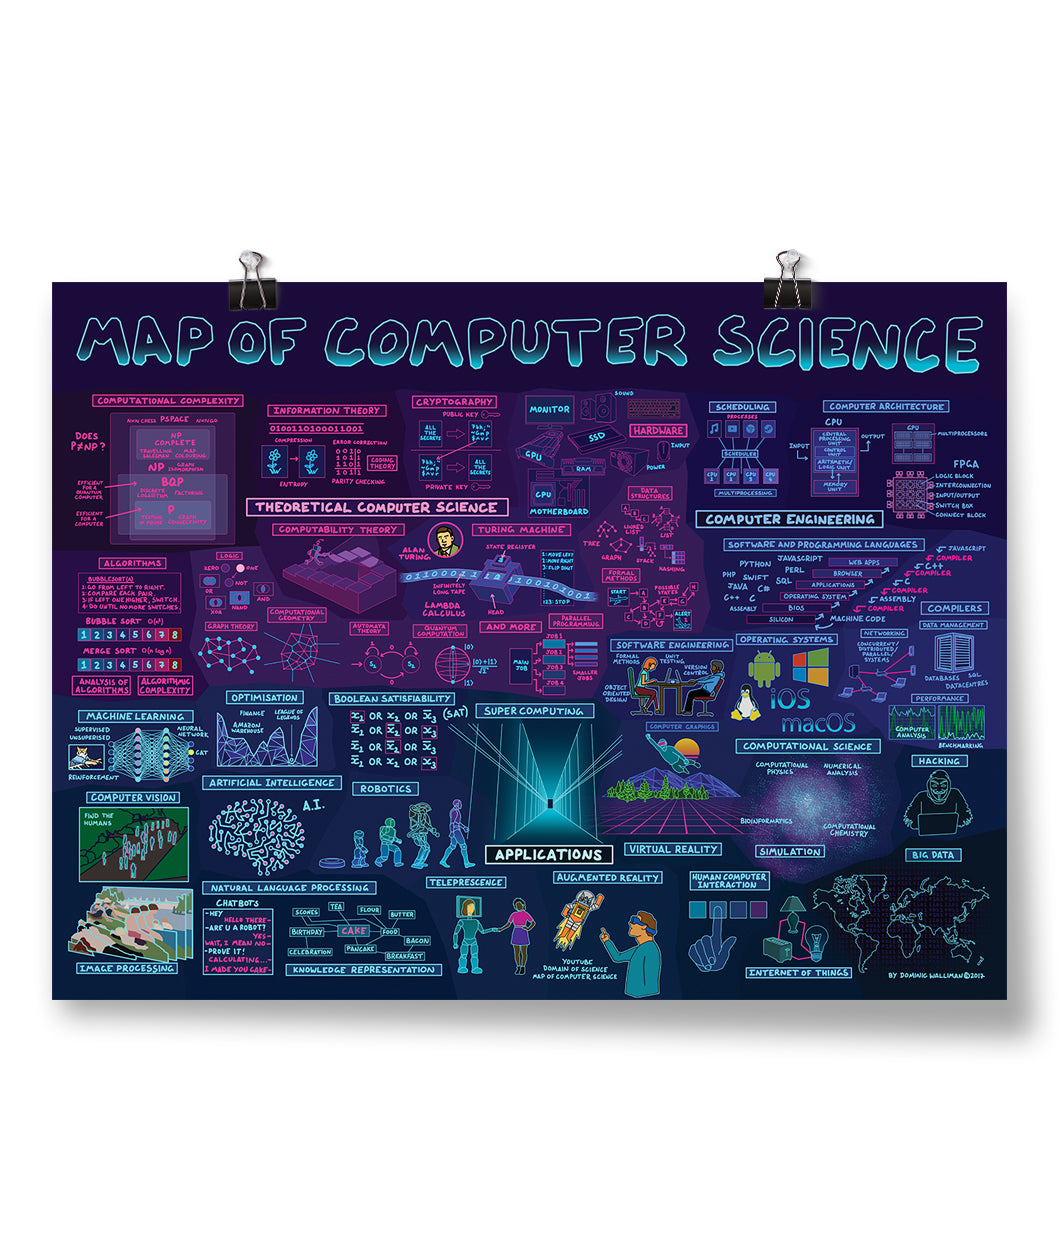 Blue horizontal poster covered in light-blue and purple text and graphics - by Domain of Science